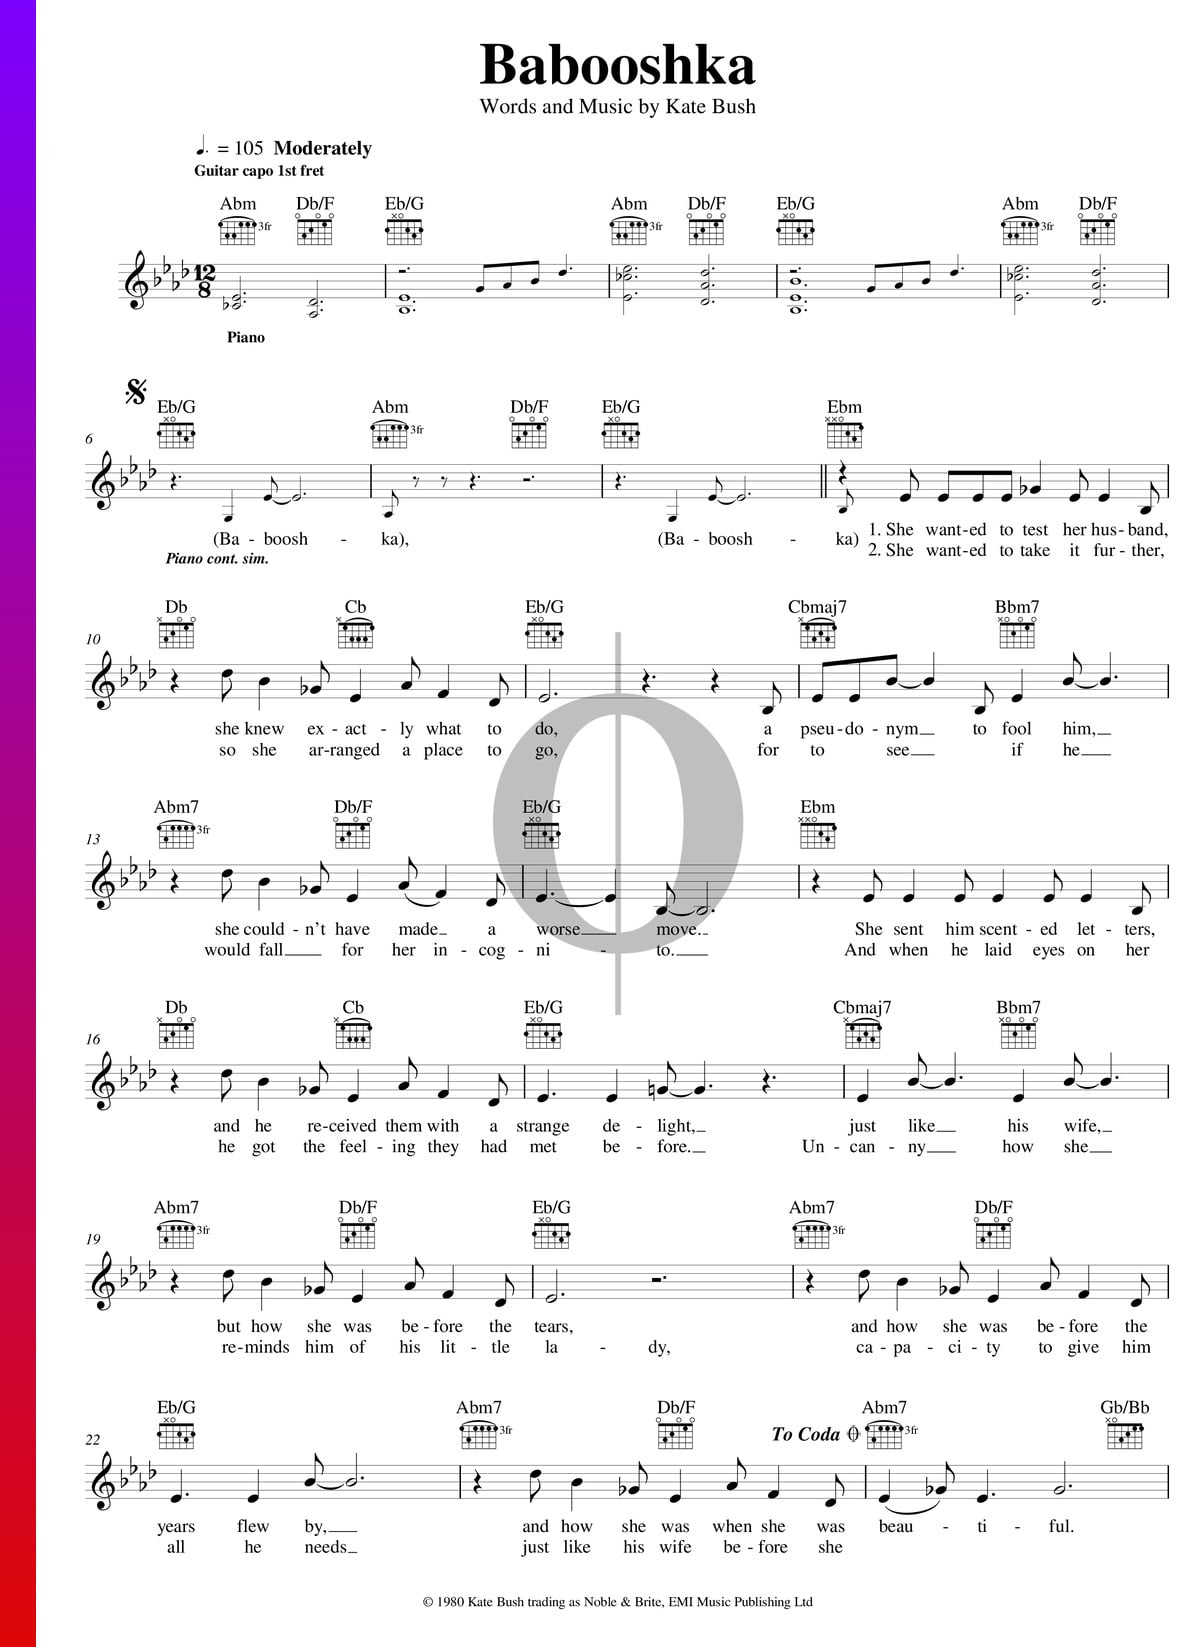 Babooshka Sheet Music Piano Voice Guitar Pdf Download Streaming Oktav Released as a single in june 1980, it spent 10 weeks in the uk chart, peaking at number five. babooshka sheet music piano voice